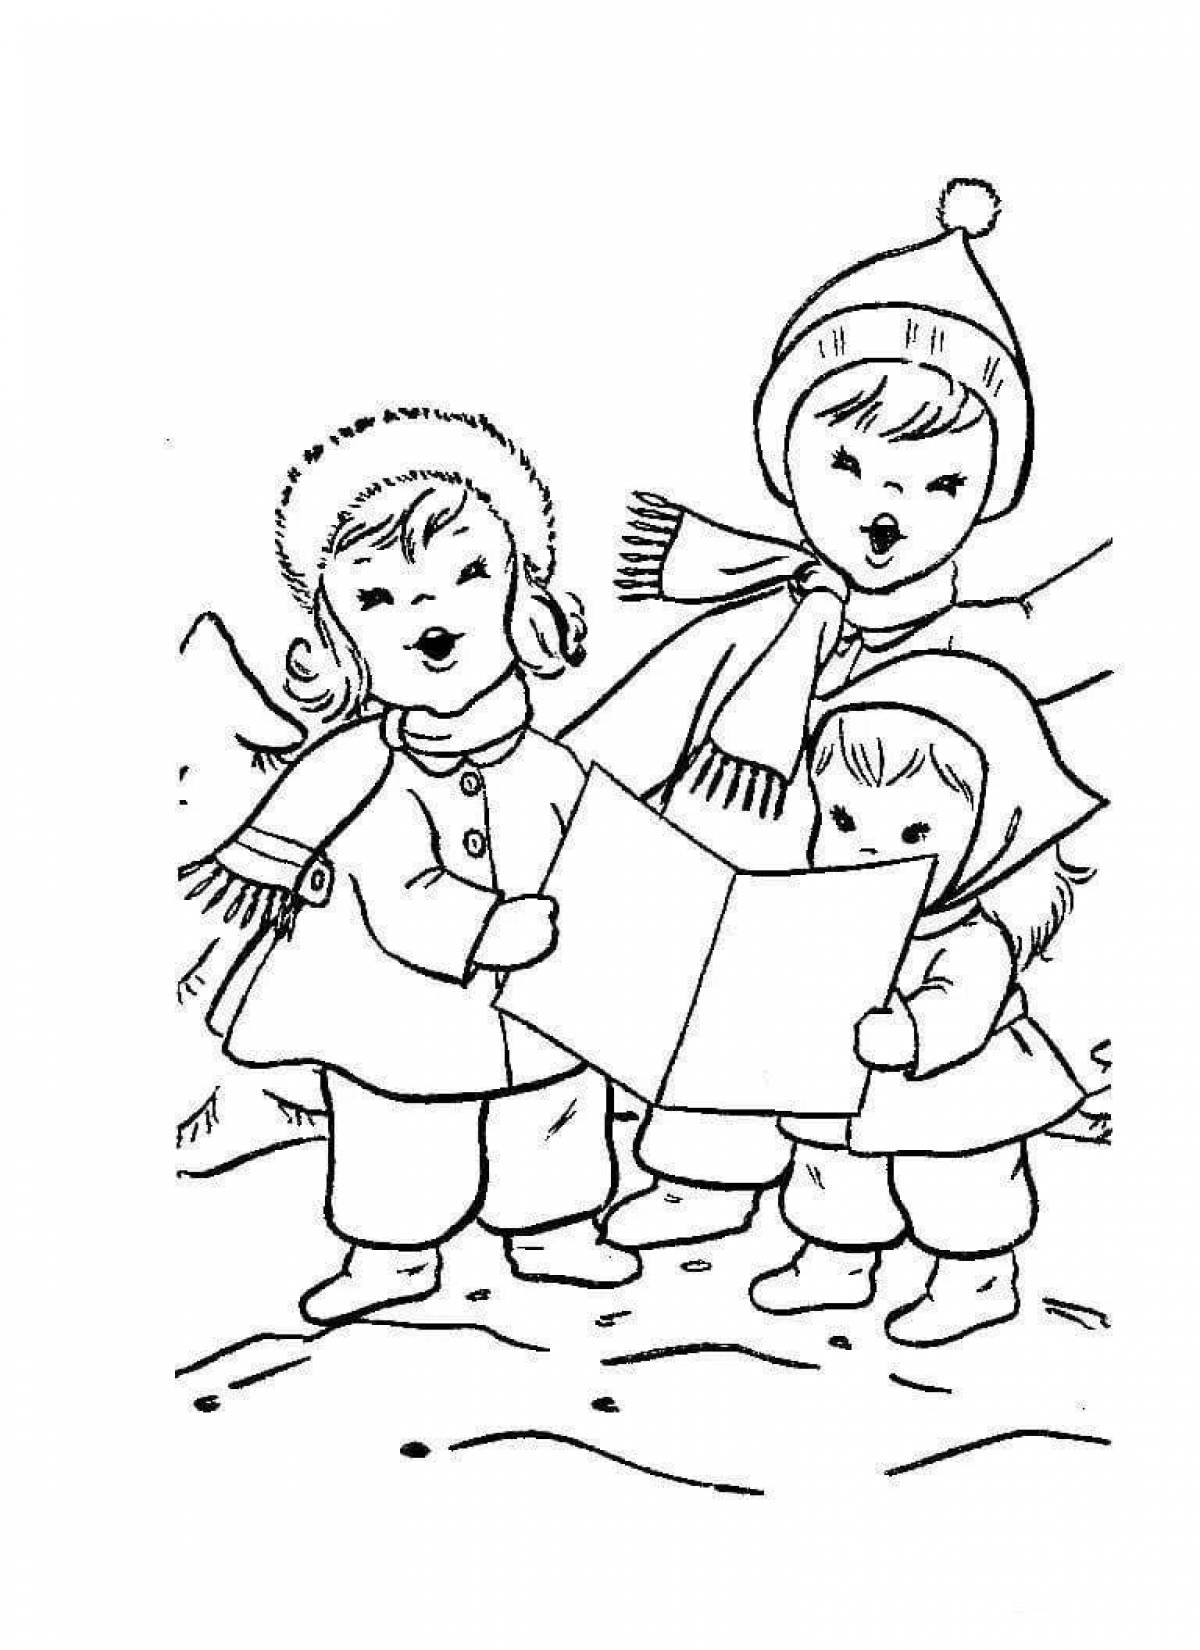 Carol's exquisite christmas coloring book